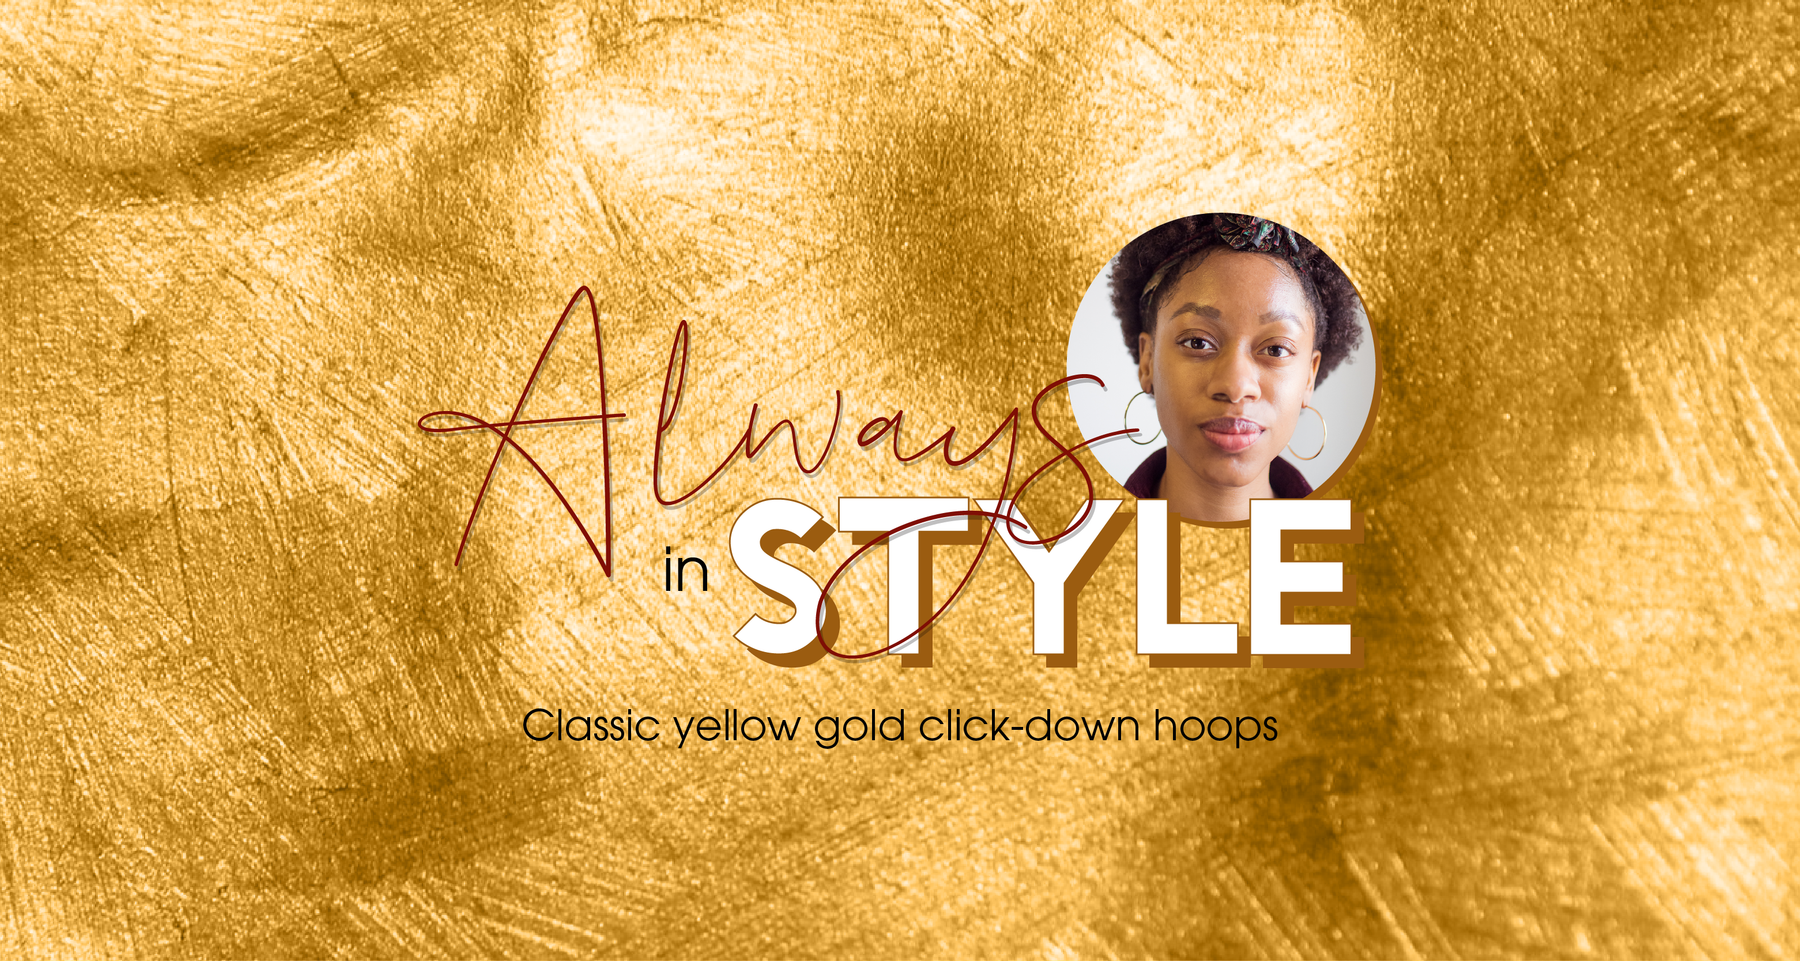 Always in Style: Classic Gold Hoops